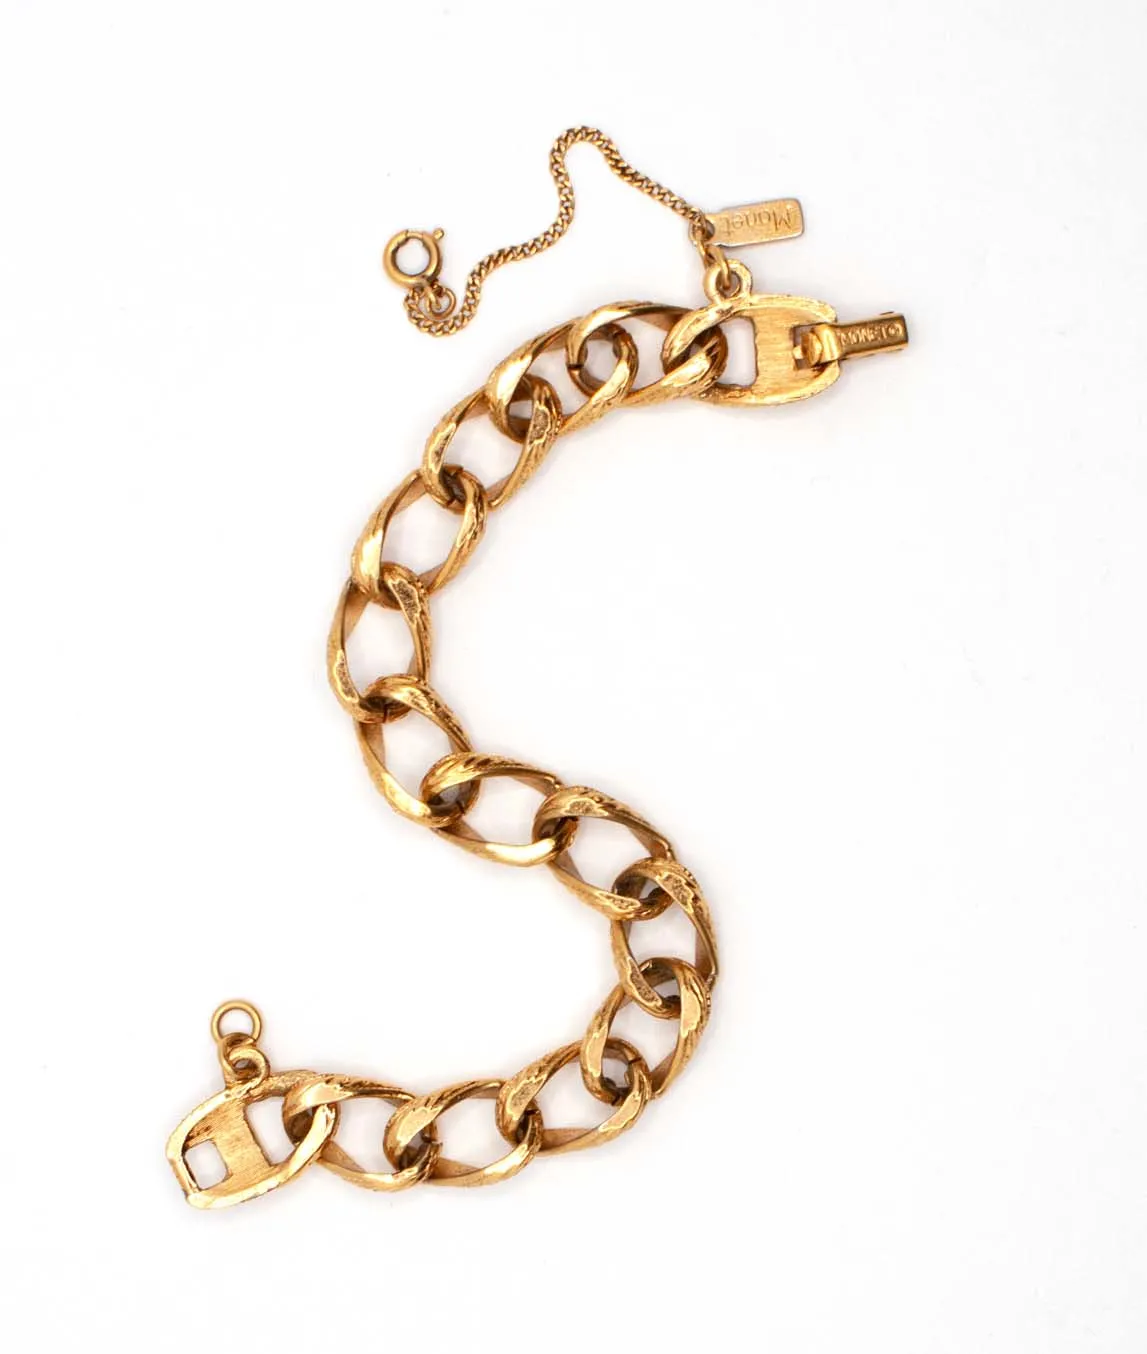 Gold tone vintage Monet charm link bracelet with safety chain shown in S shape